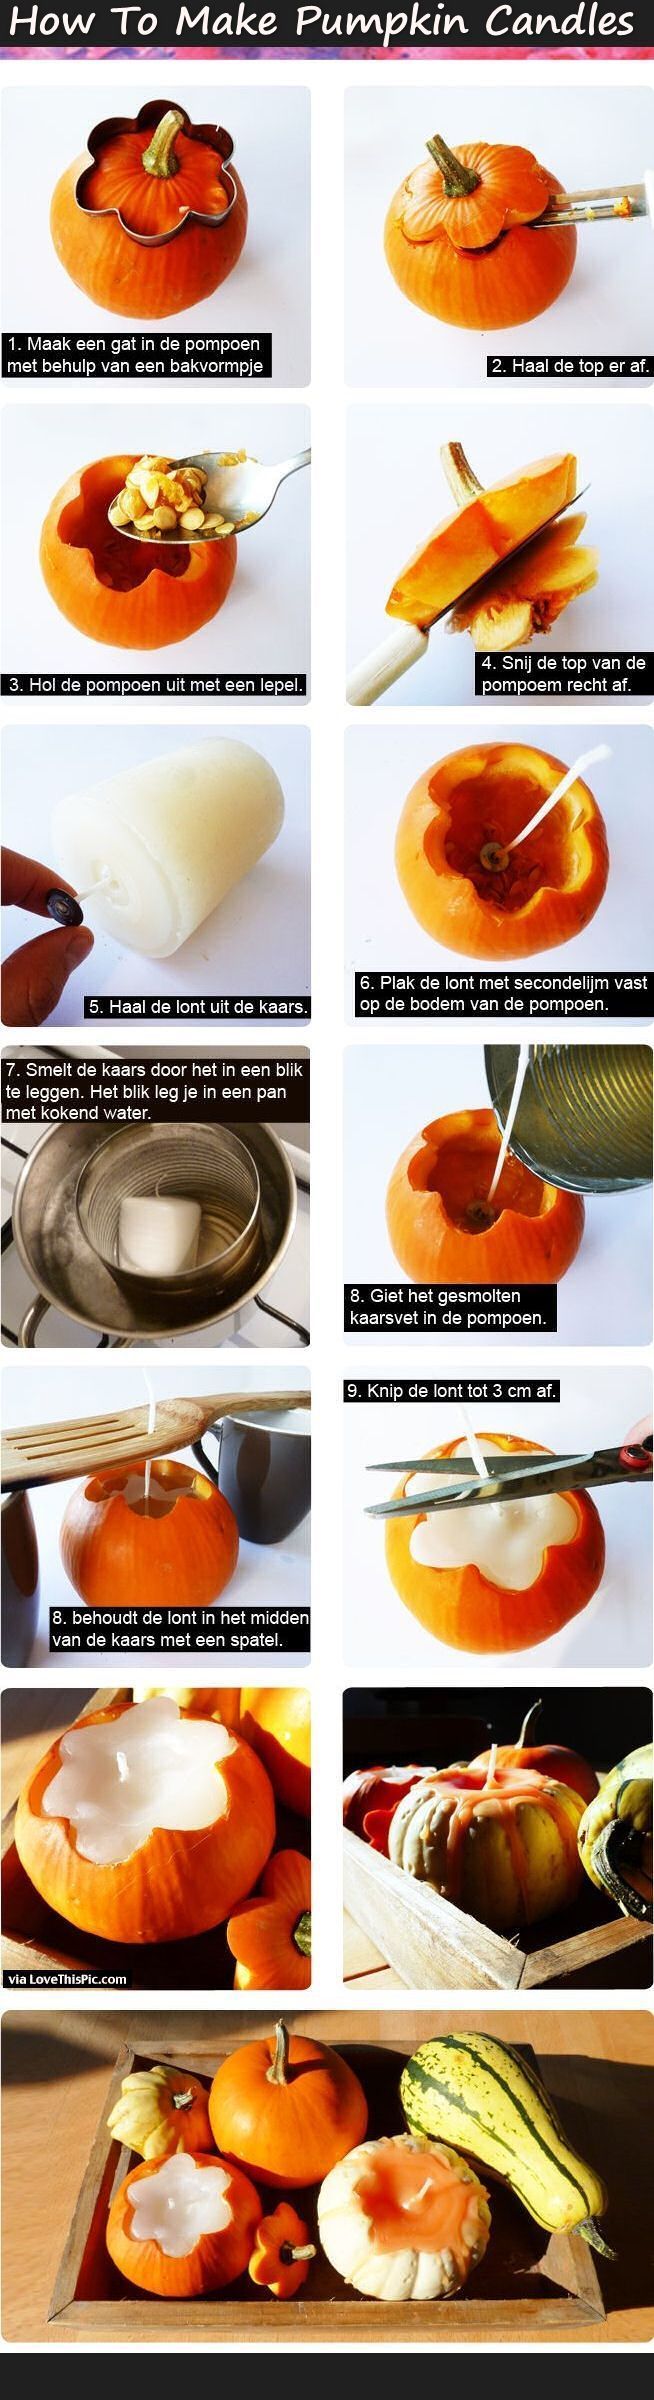 How To Make Pumpkin Candles Pictures, Photos, and Images for Facebook, Tumblr, Pinterest, and Twitter